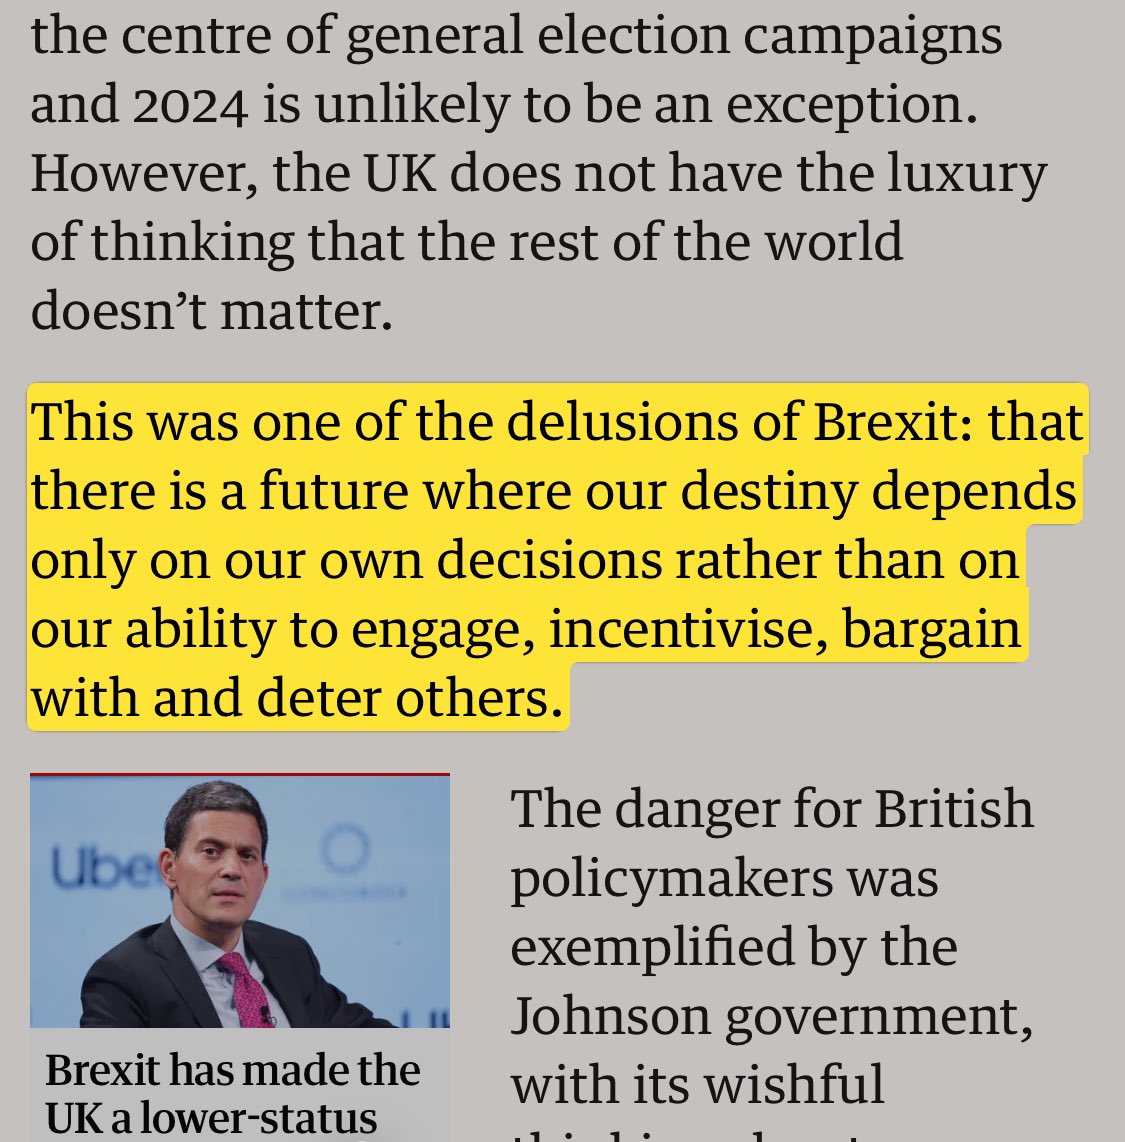 This is nonsense from Miliband, who was one of the architects of the UK’s disastrous Middle East policy when UK was still in EU. Independence from the EU was never about isolation; it was about disconnecting from flawed and undemocratic institutions in Brussels, and rejoining…